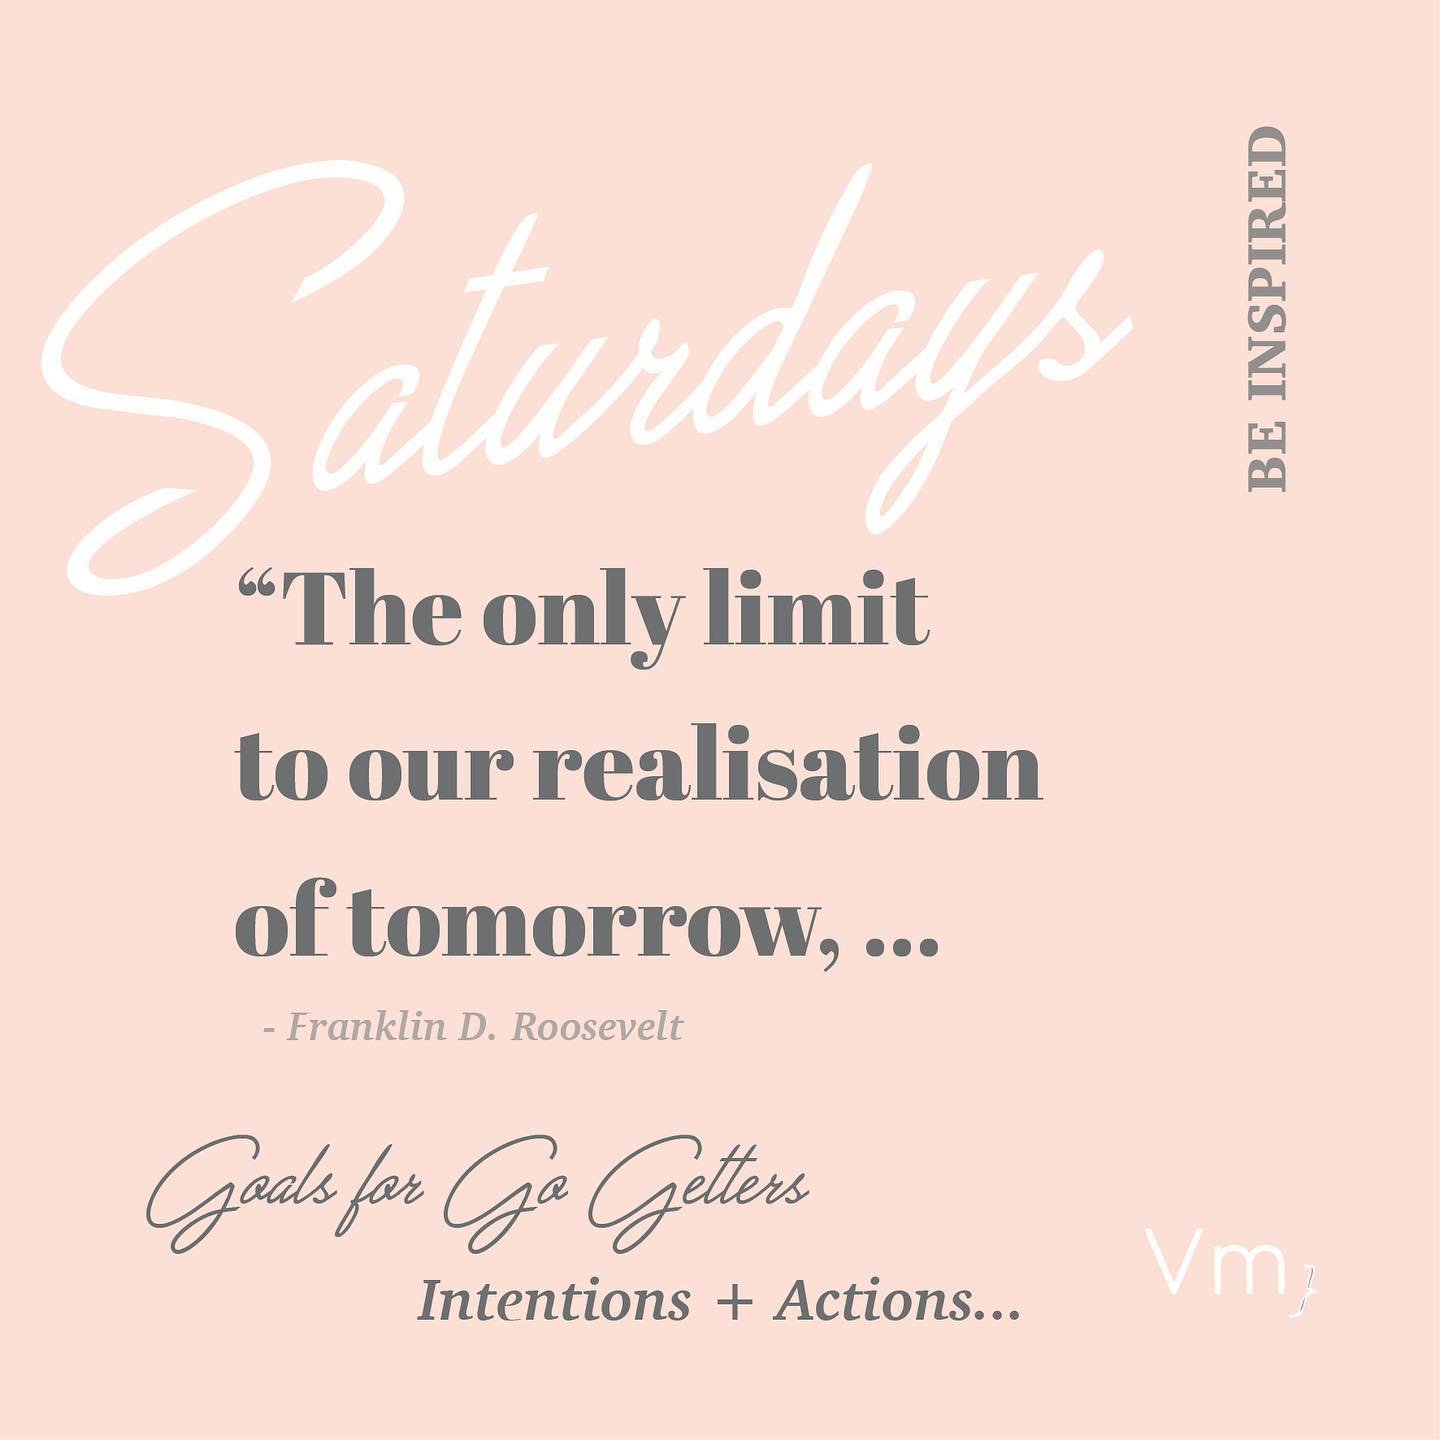 &ldquo;The only limit to our realisation of tomorrow will be our doubts of today.&rdquo; - Franklin D. Roosevelt

Hope you have a wonderful Saturday 🌸🤍🌸

#visualmilk #visualmilkstudio #visualmilkmarketing #visualmilkdesign #visualmilkquote #visual